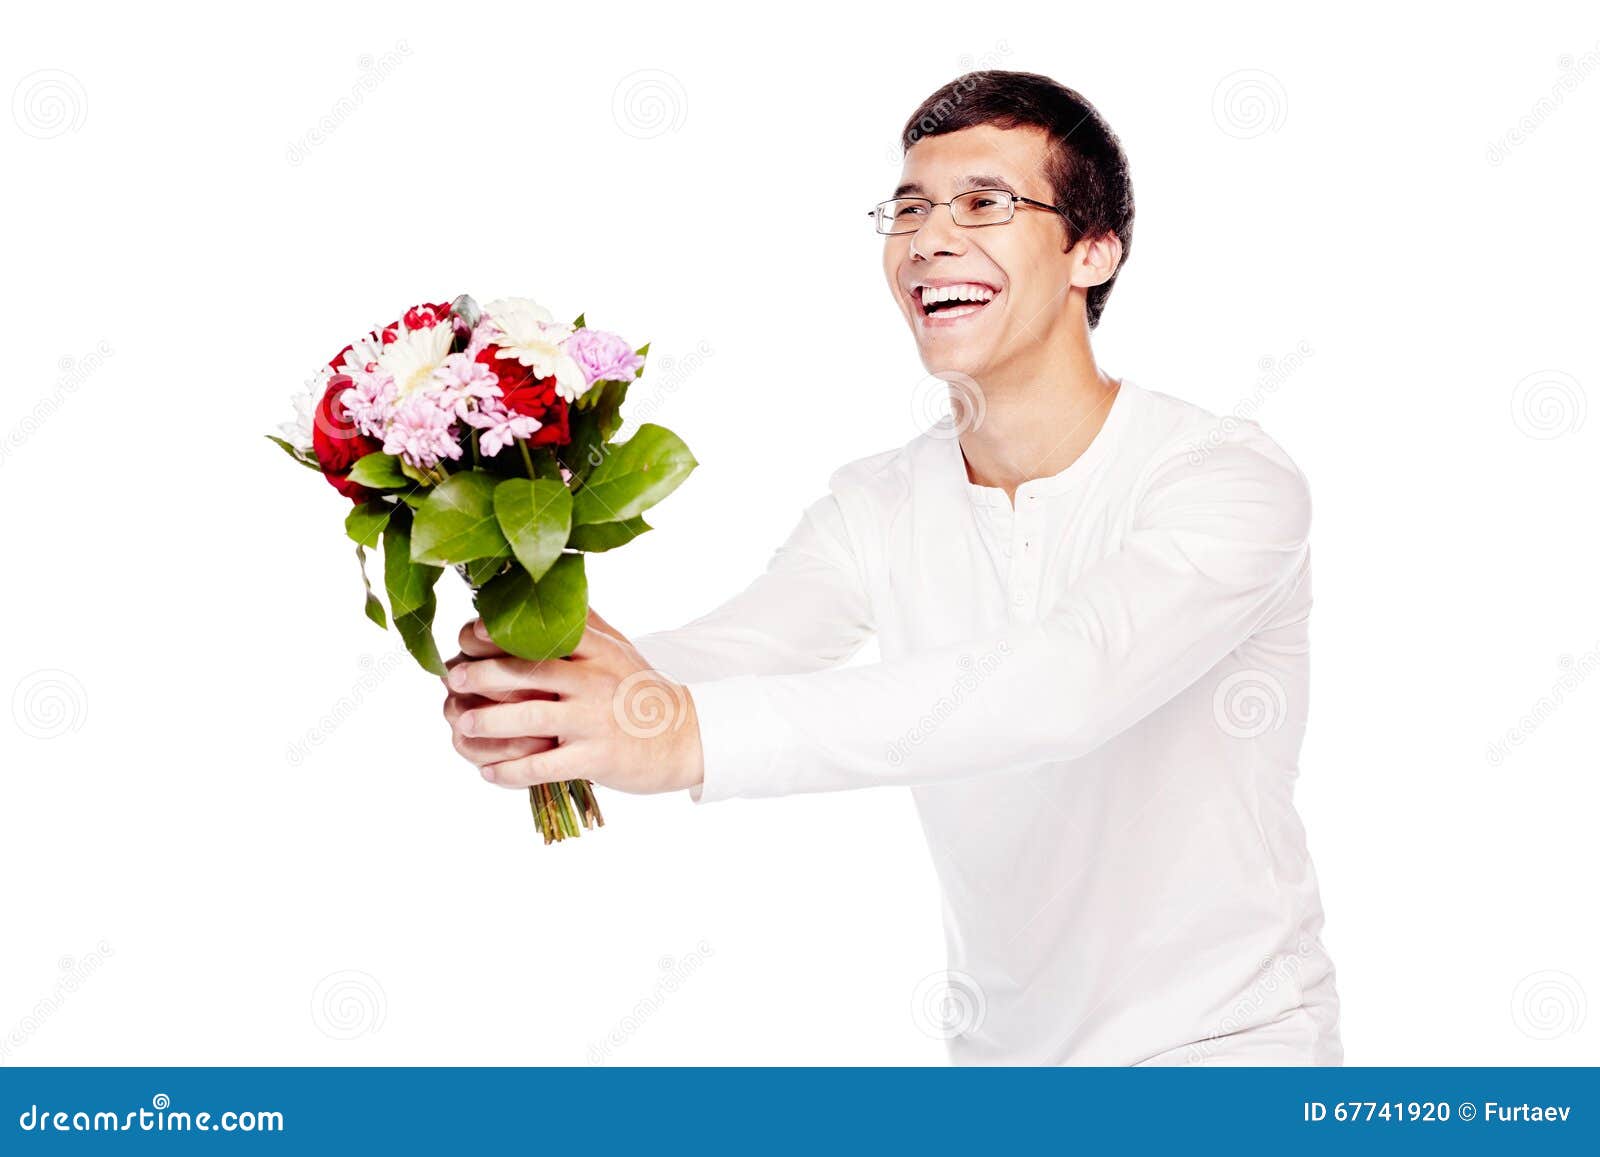 Guy Giving Bouquet of Flowers Stock Photo - Image of holding, guys ...